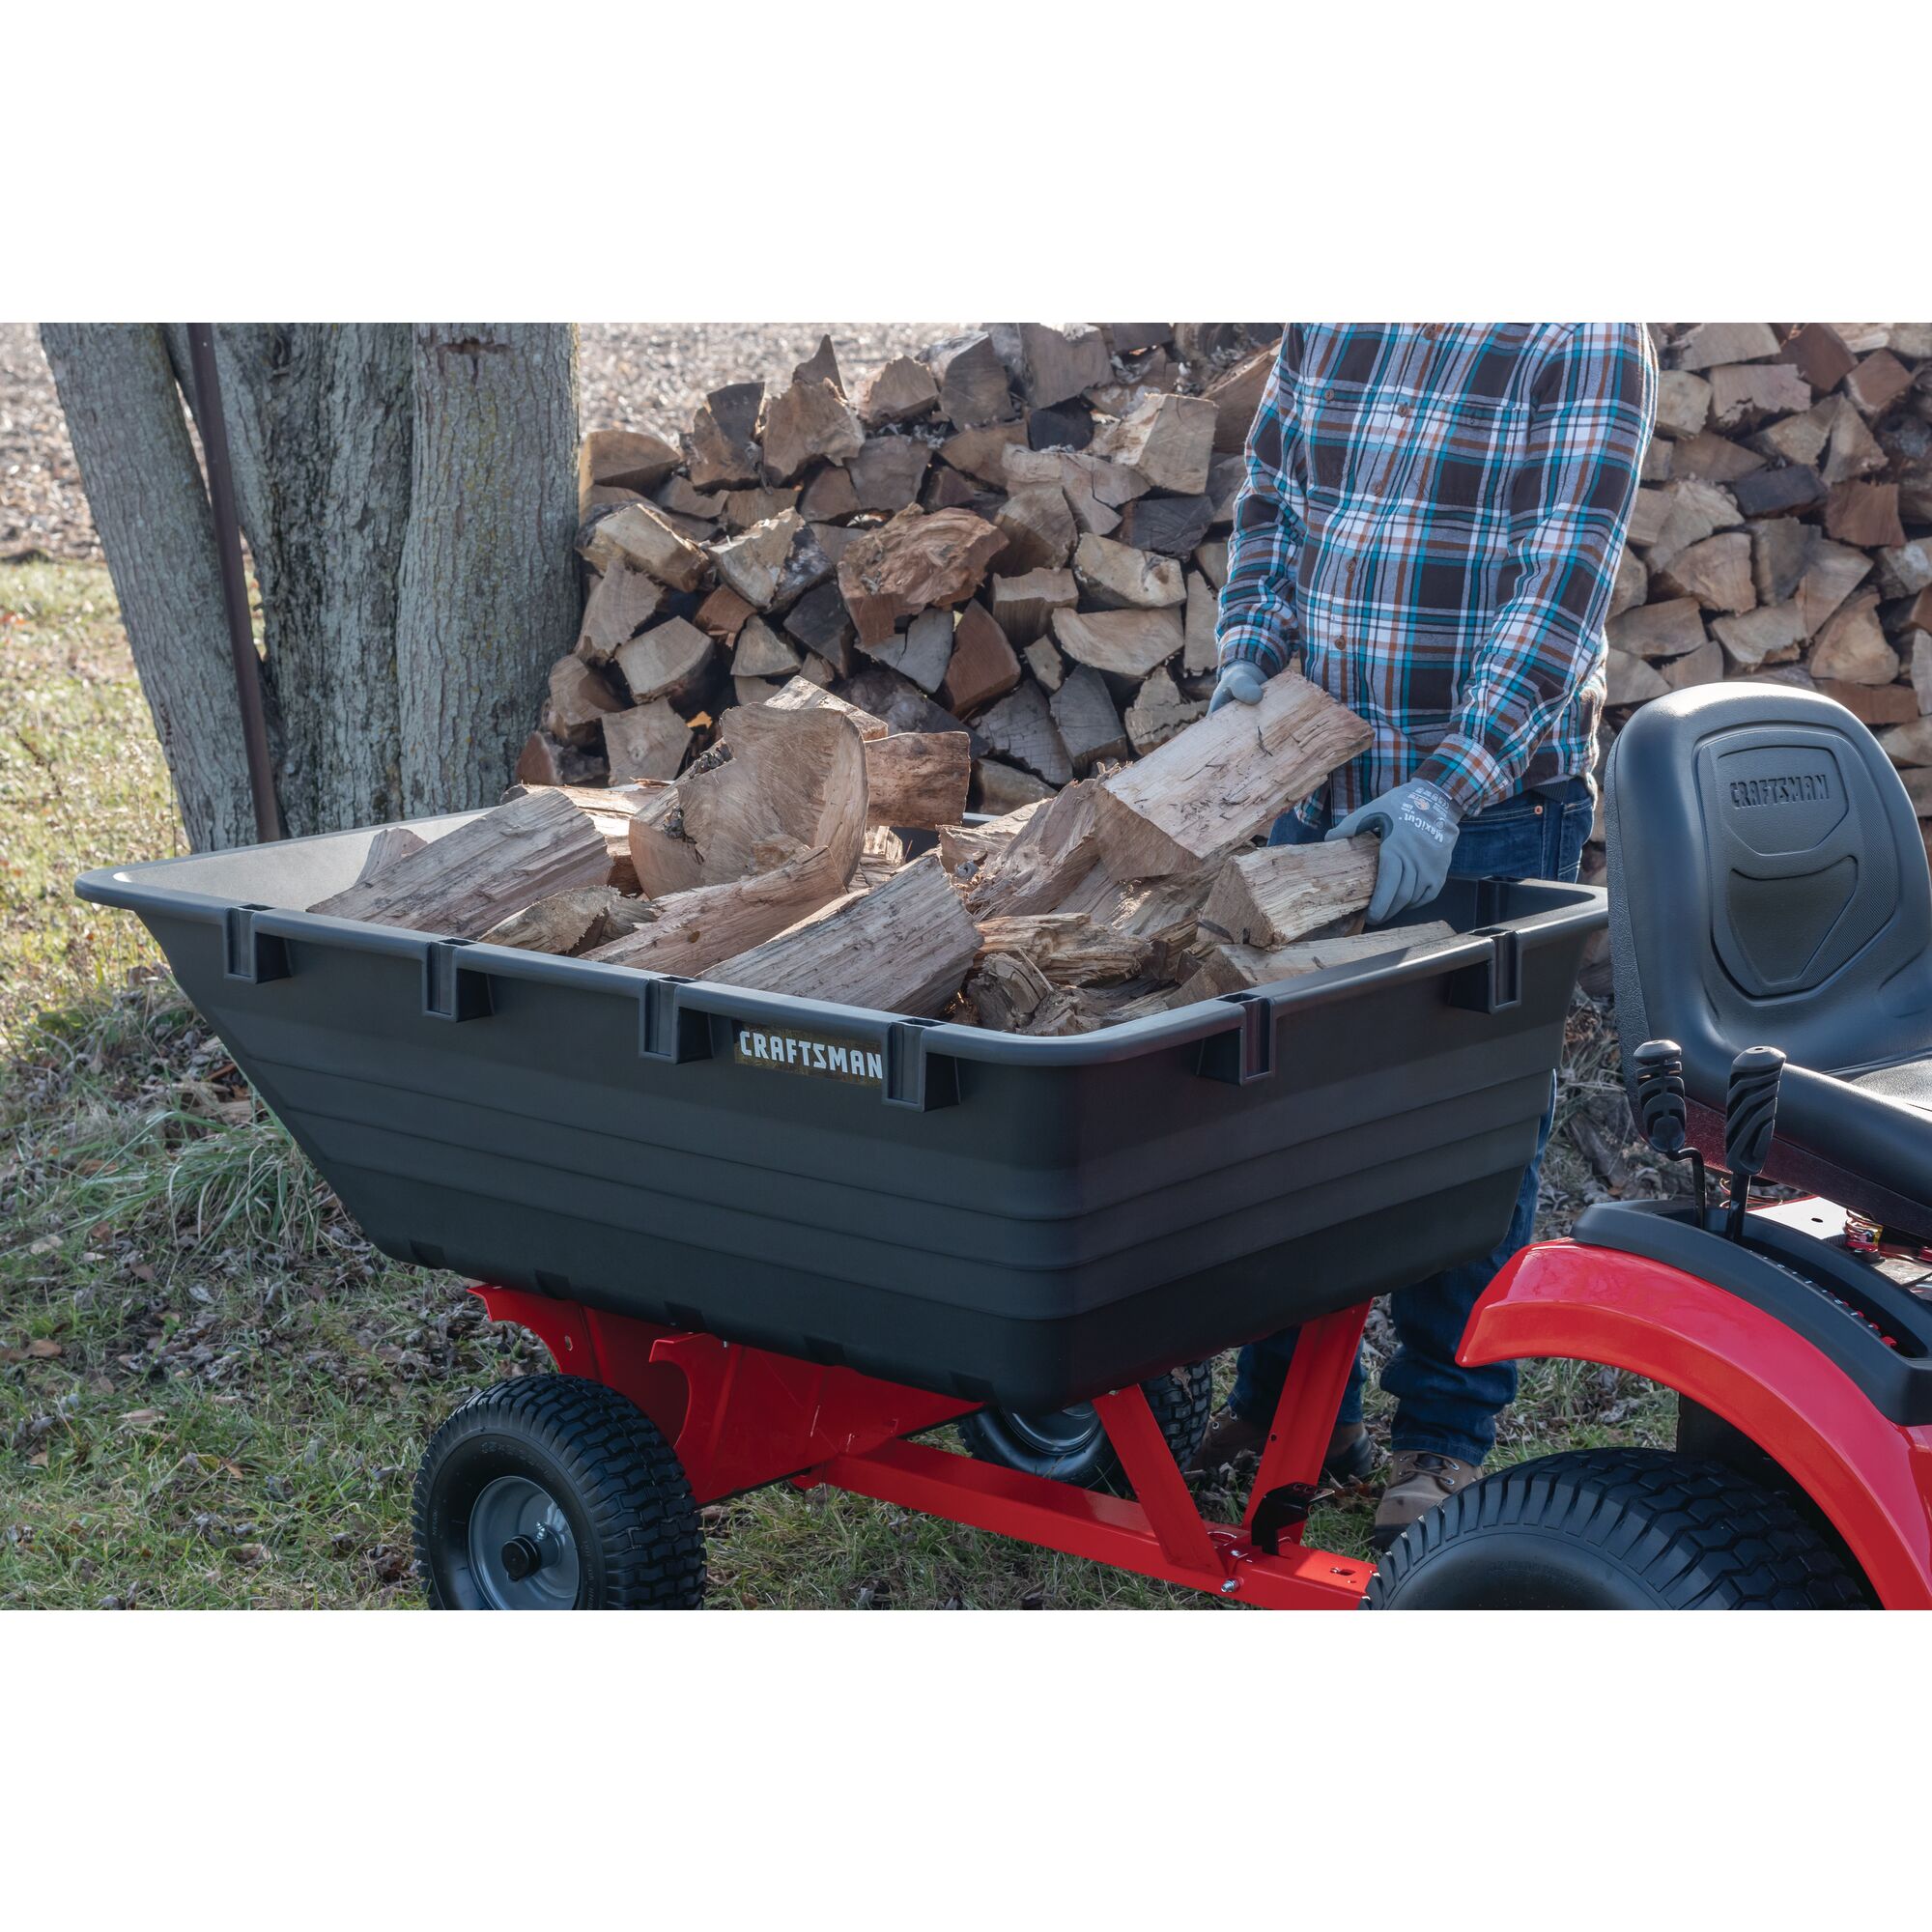 17 cubic foot poly cart being used to carry wood.